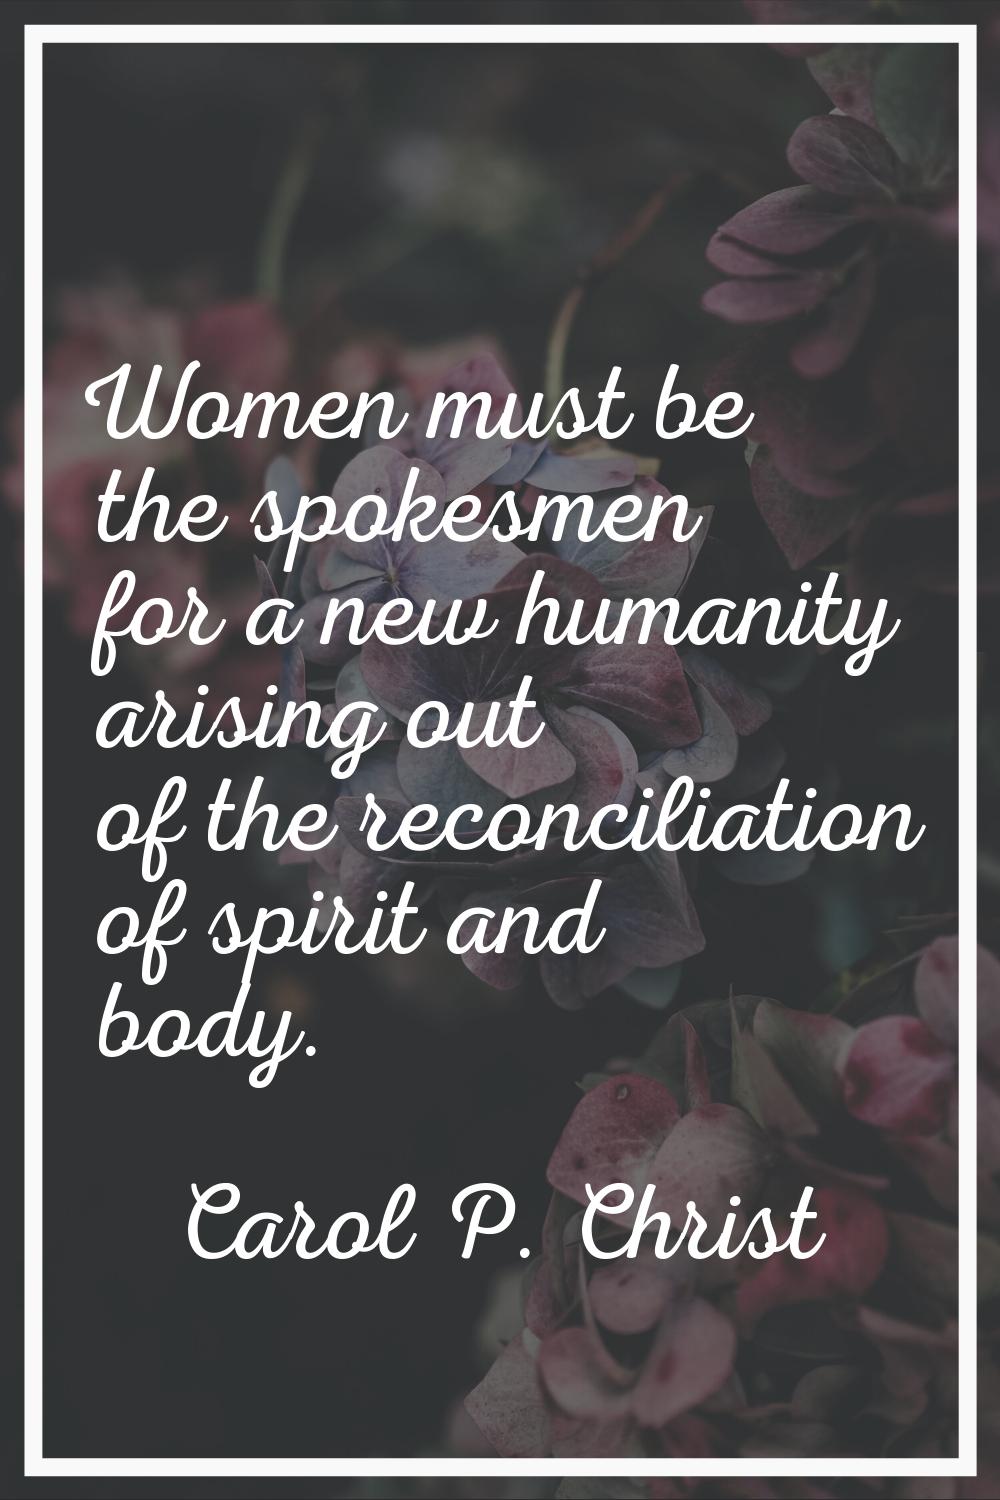 Women must be the spokesmen for a new humanity arising out of the reconciliation of spirit and body